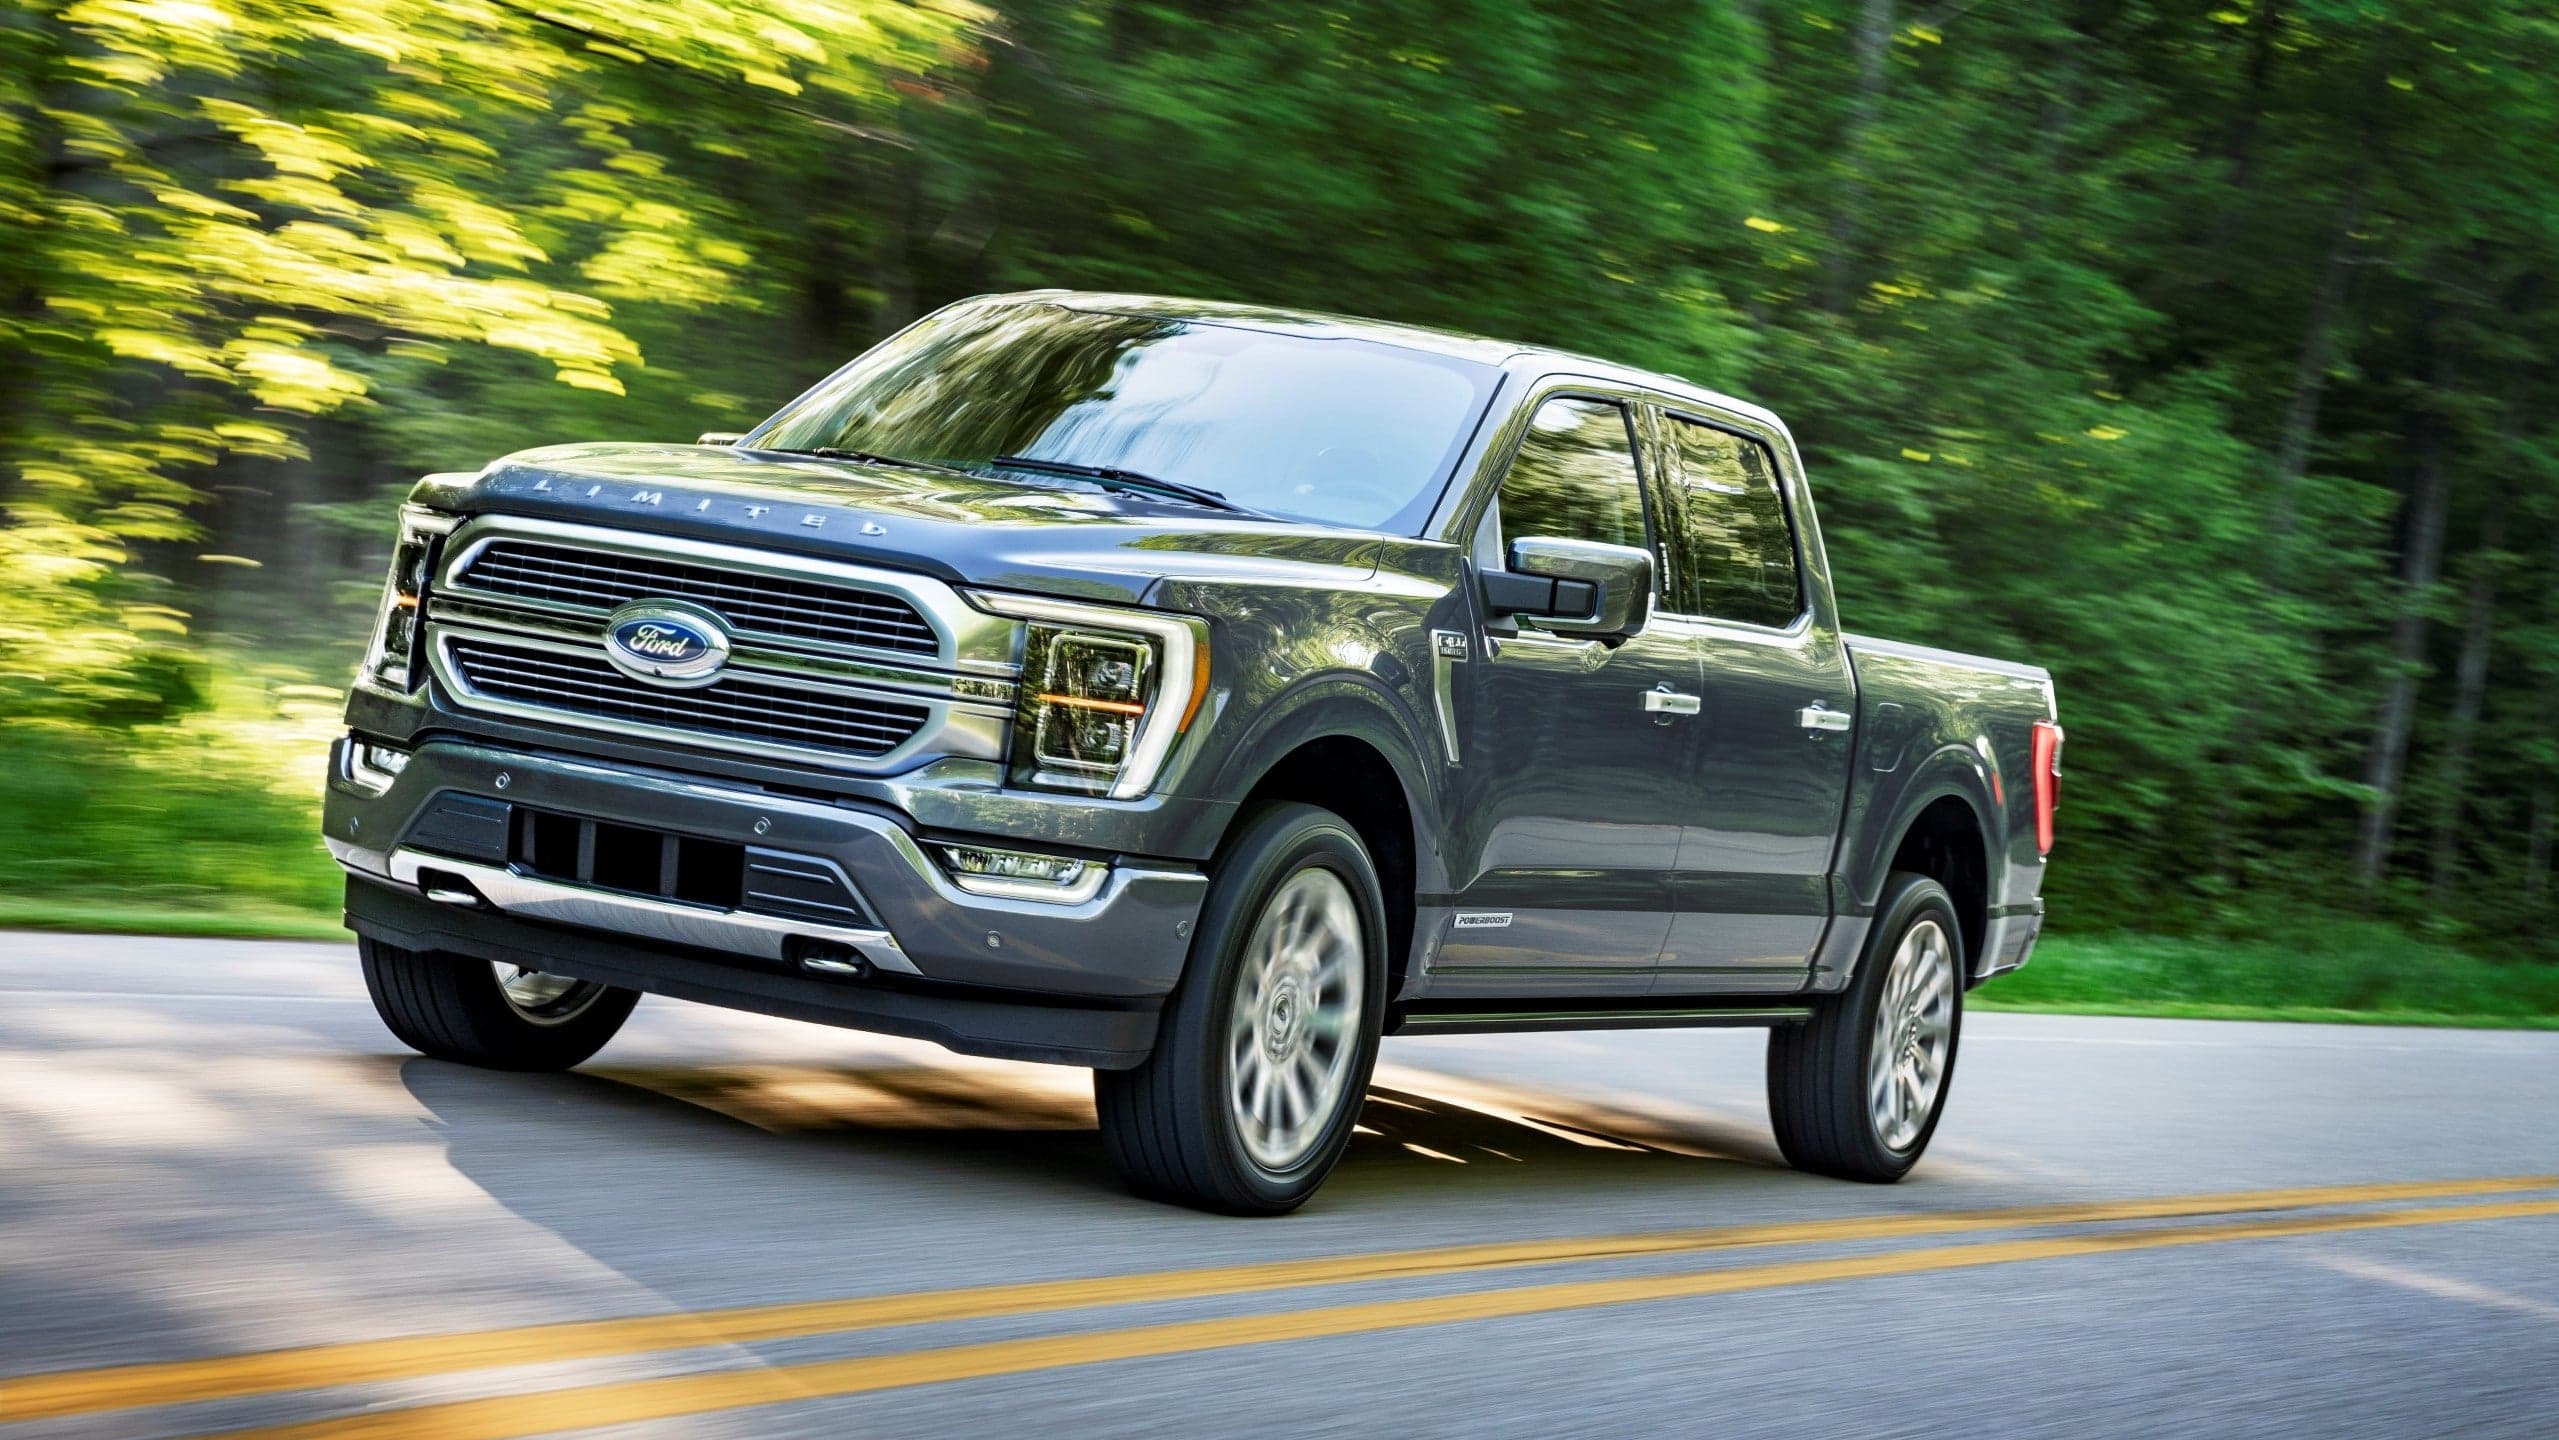 2021 Ford F-150 Will Start at $30,635, Hybrid Adds Up to $4,495